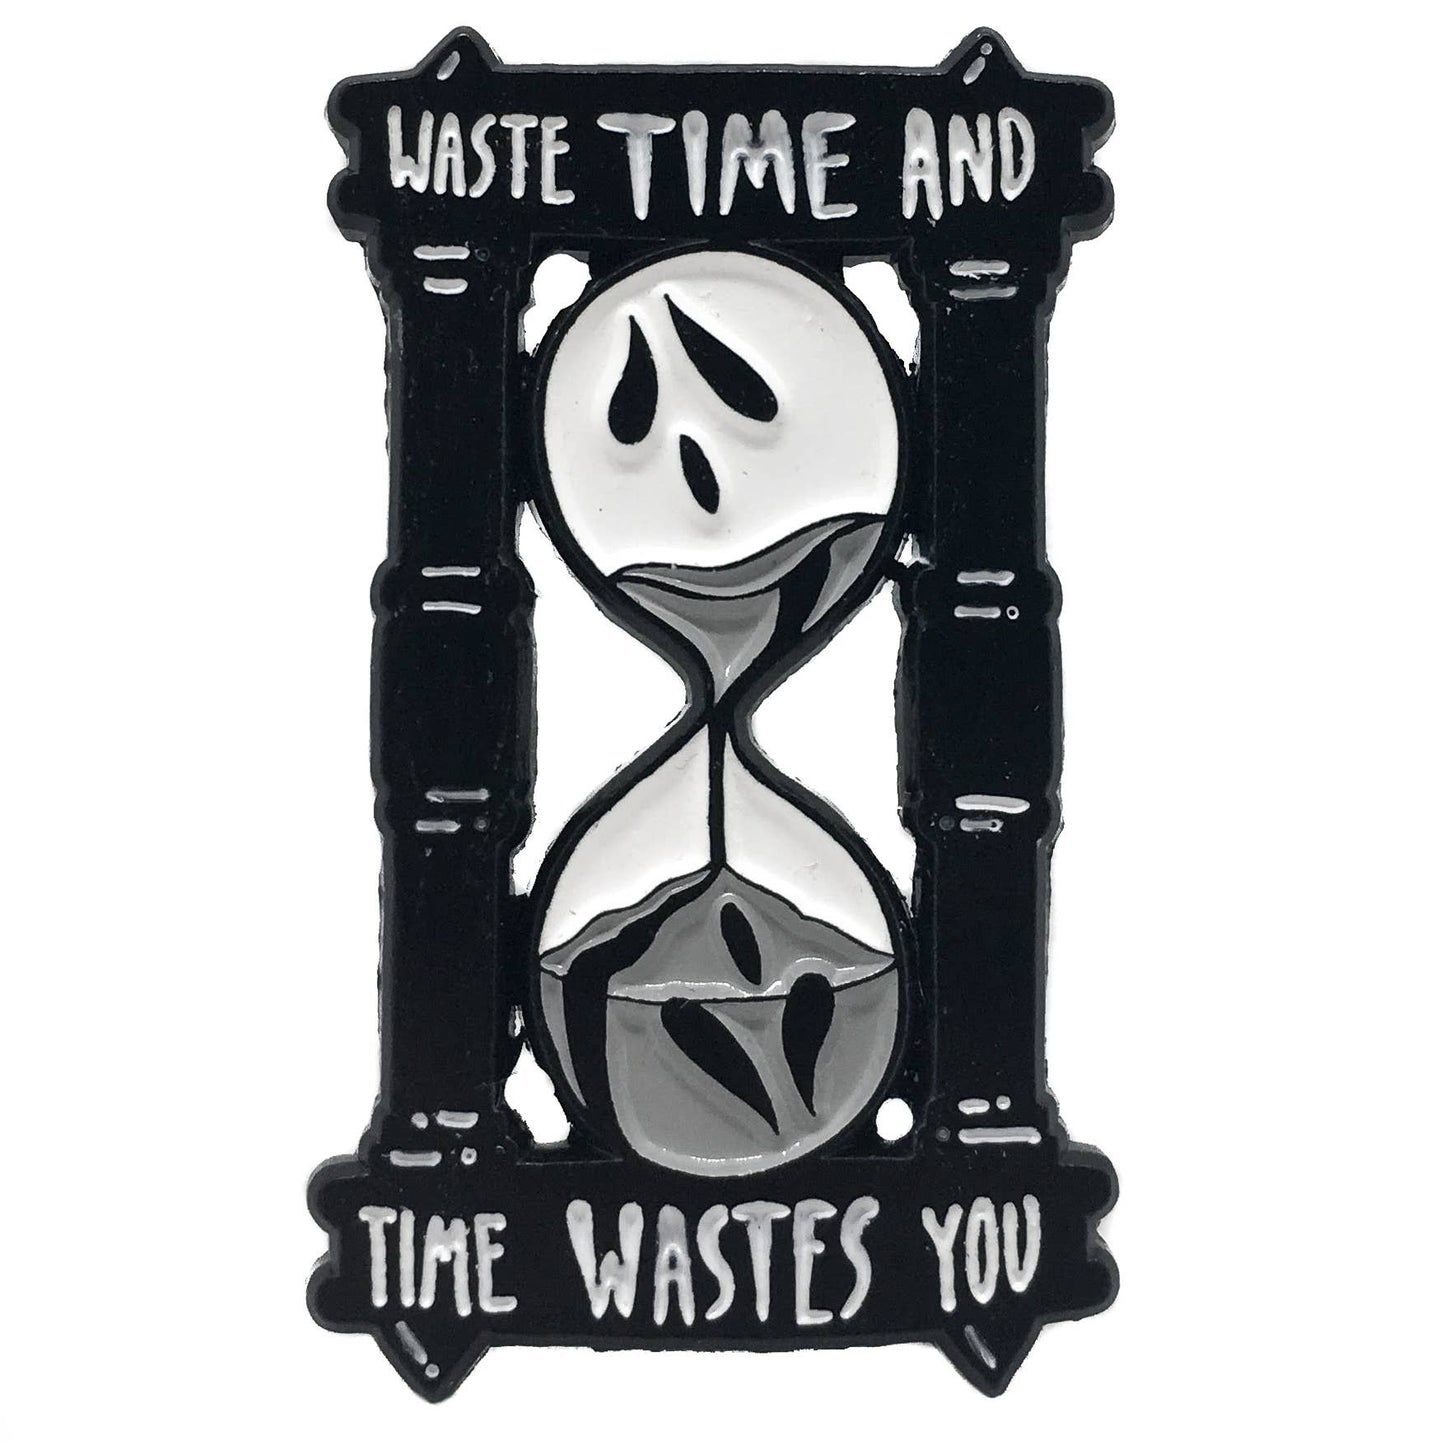 "Waste Time and Time Wastes You" Enamel Pin